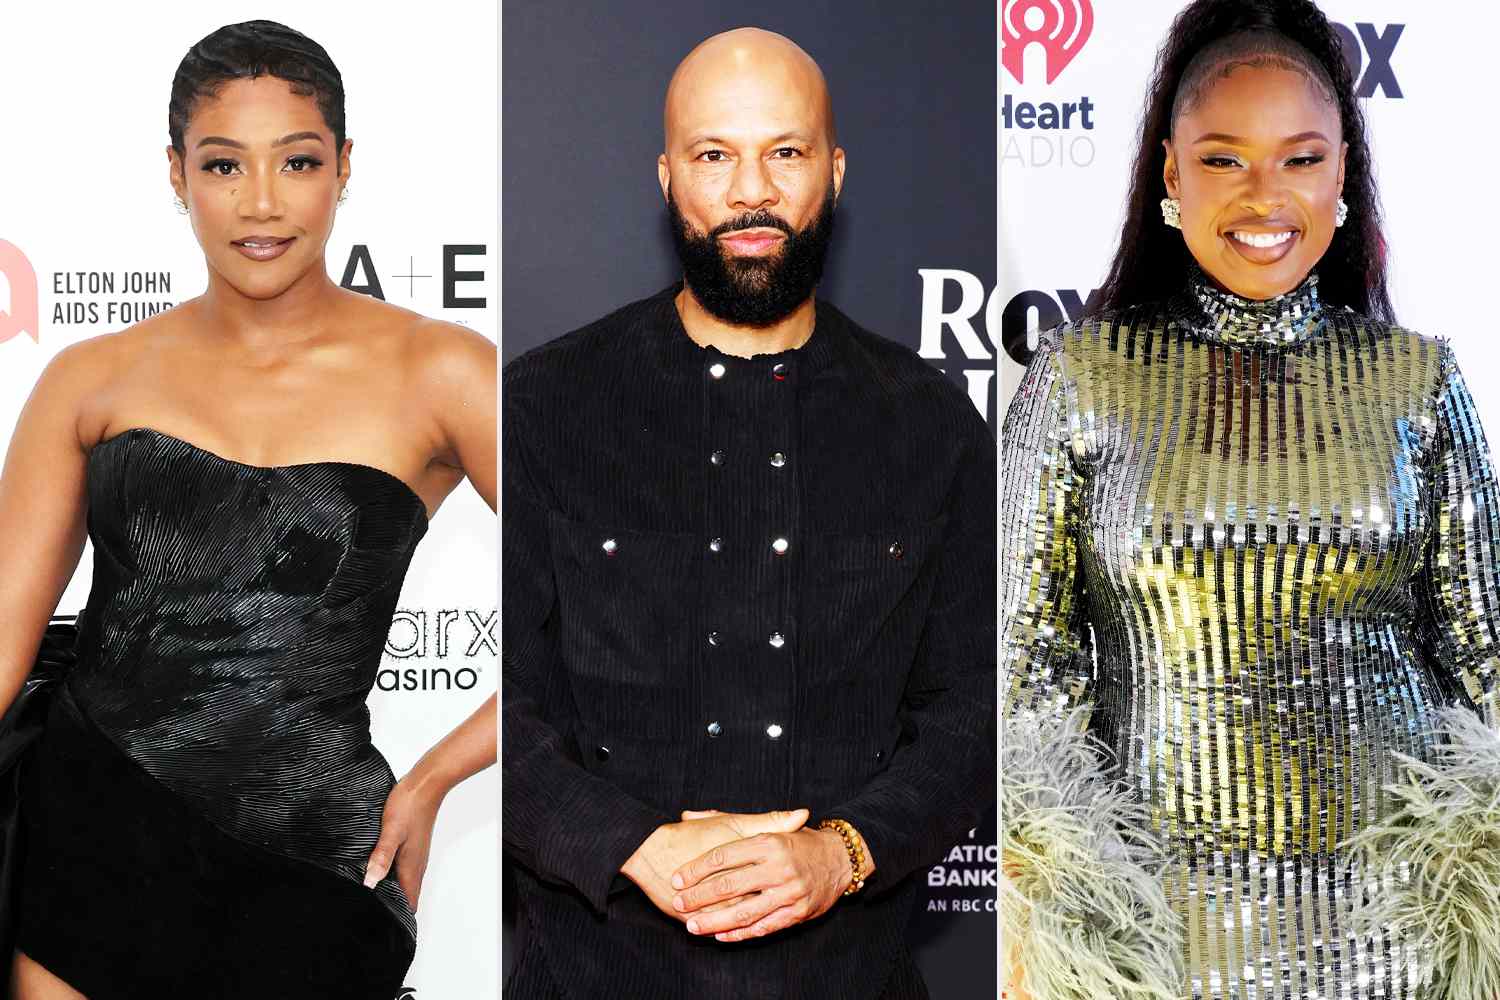 Tiffany Haddish Reacts to Ex Common's Relationship with Jennifer Hudson: 'I Hope They're Having Fun'